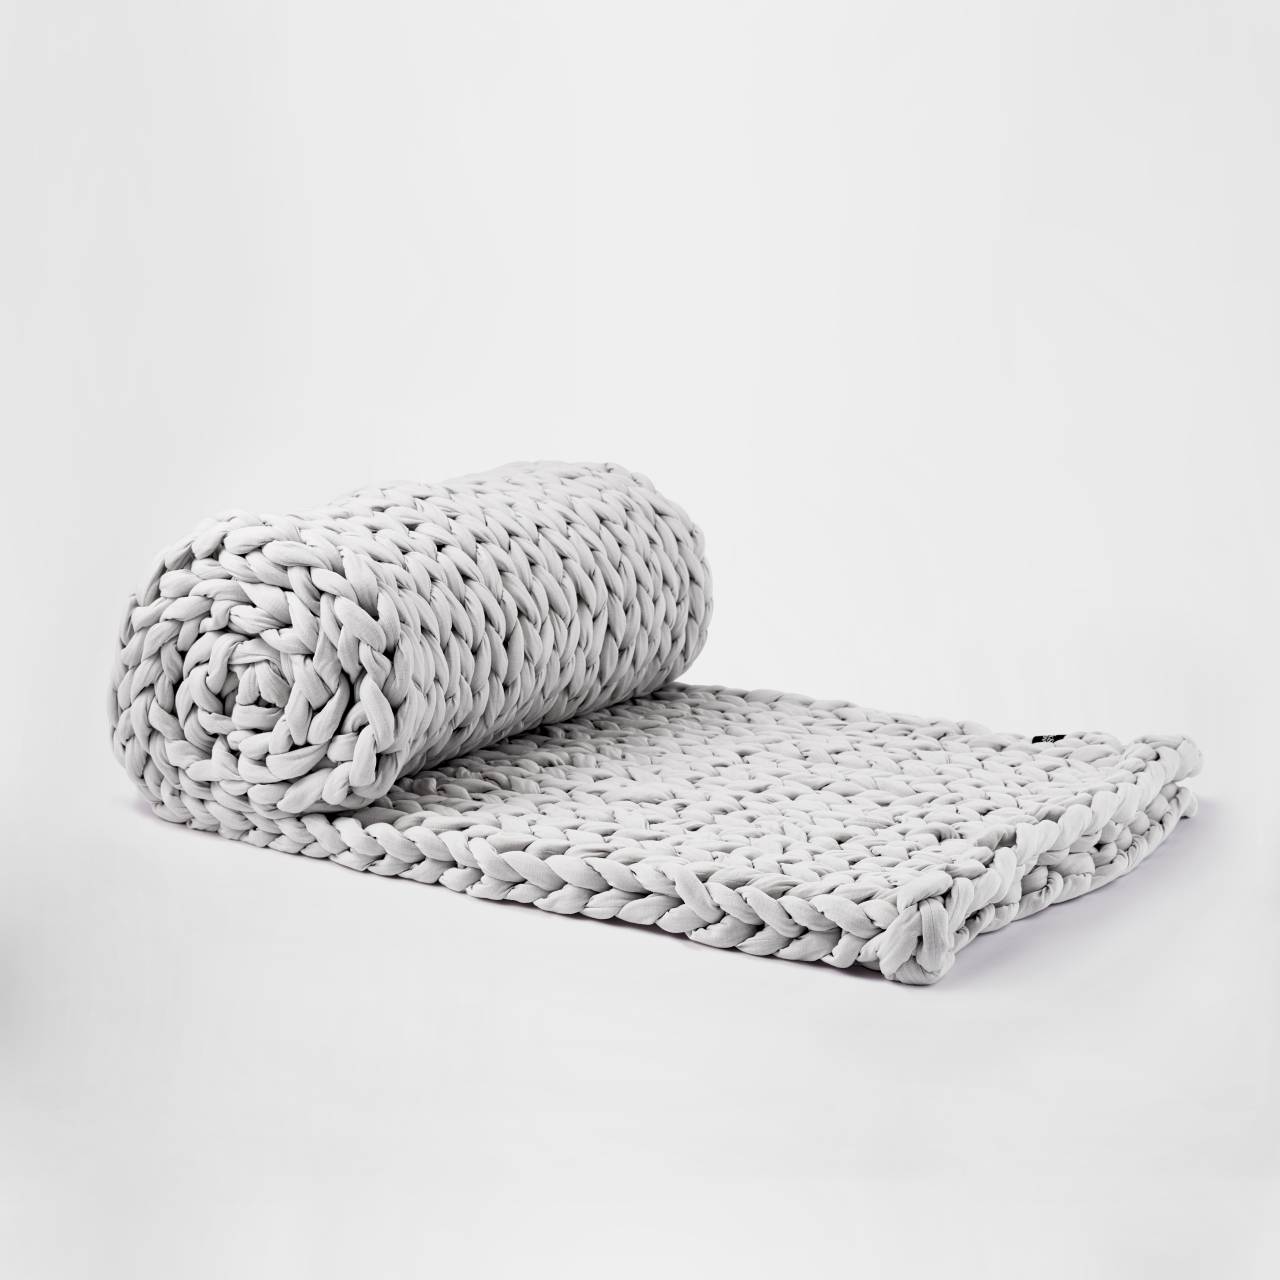 Hand Knitted Weighted Blanket Image 1